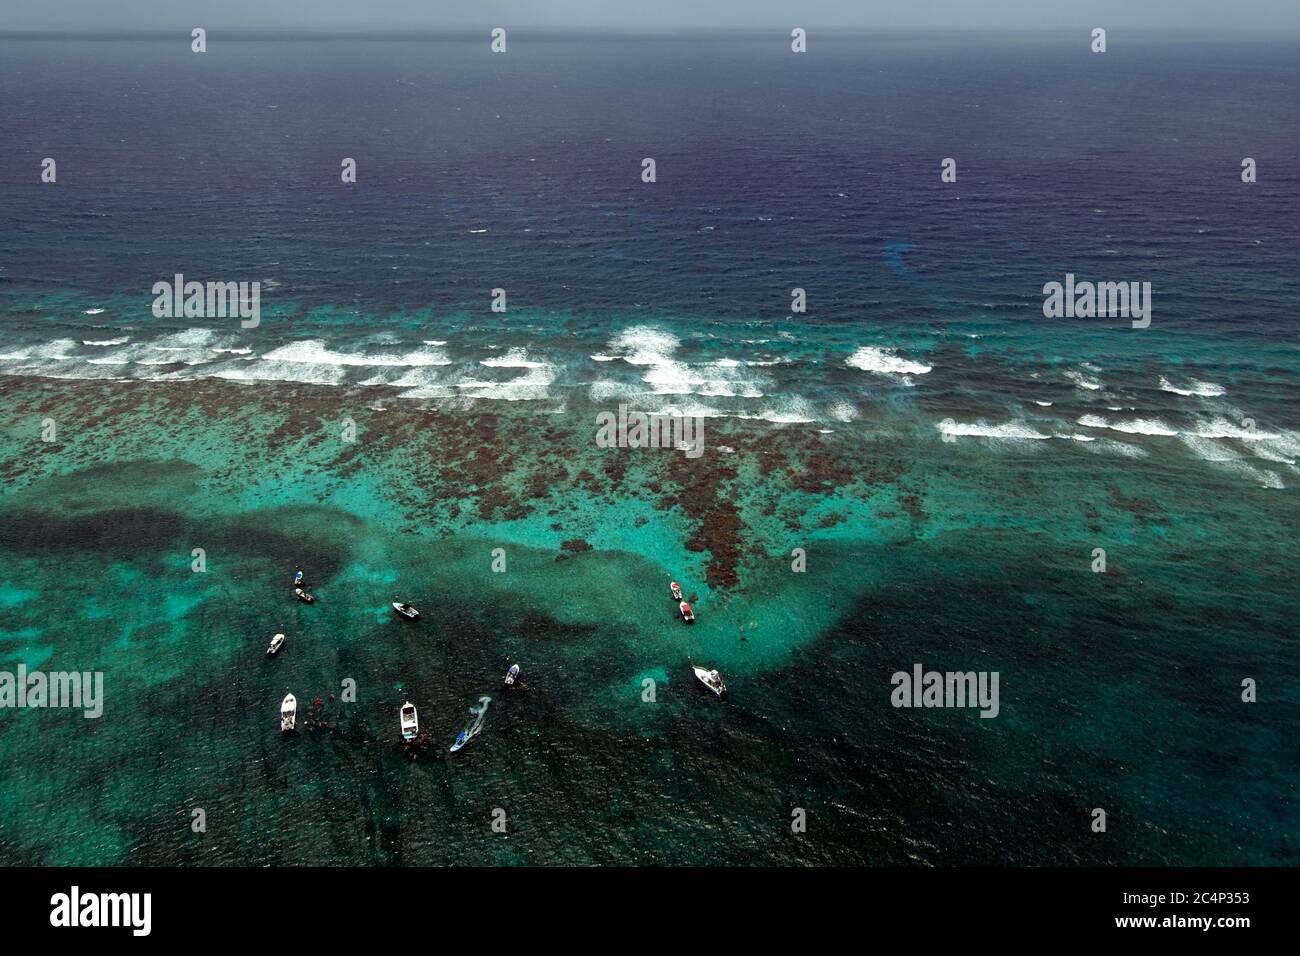 Snorkeling and diving tour boats close to the barrier reef of the Lighthouse Reef Atoll, Belize, Caribbean Sea Stock Photo